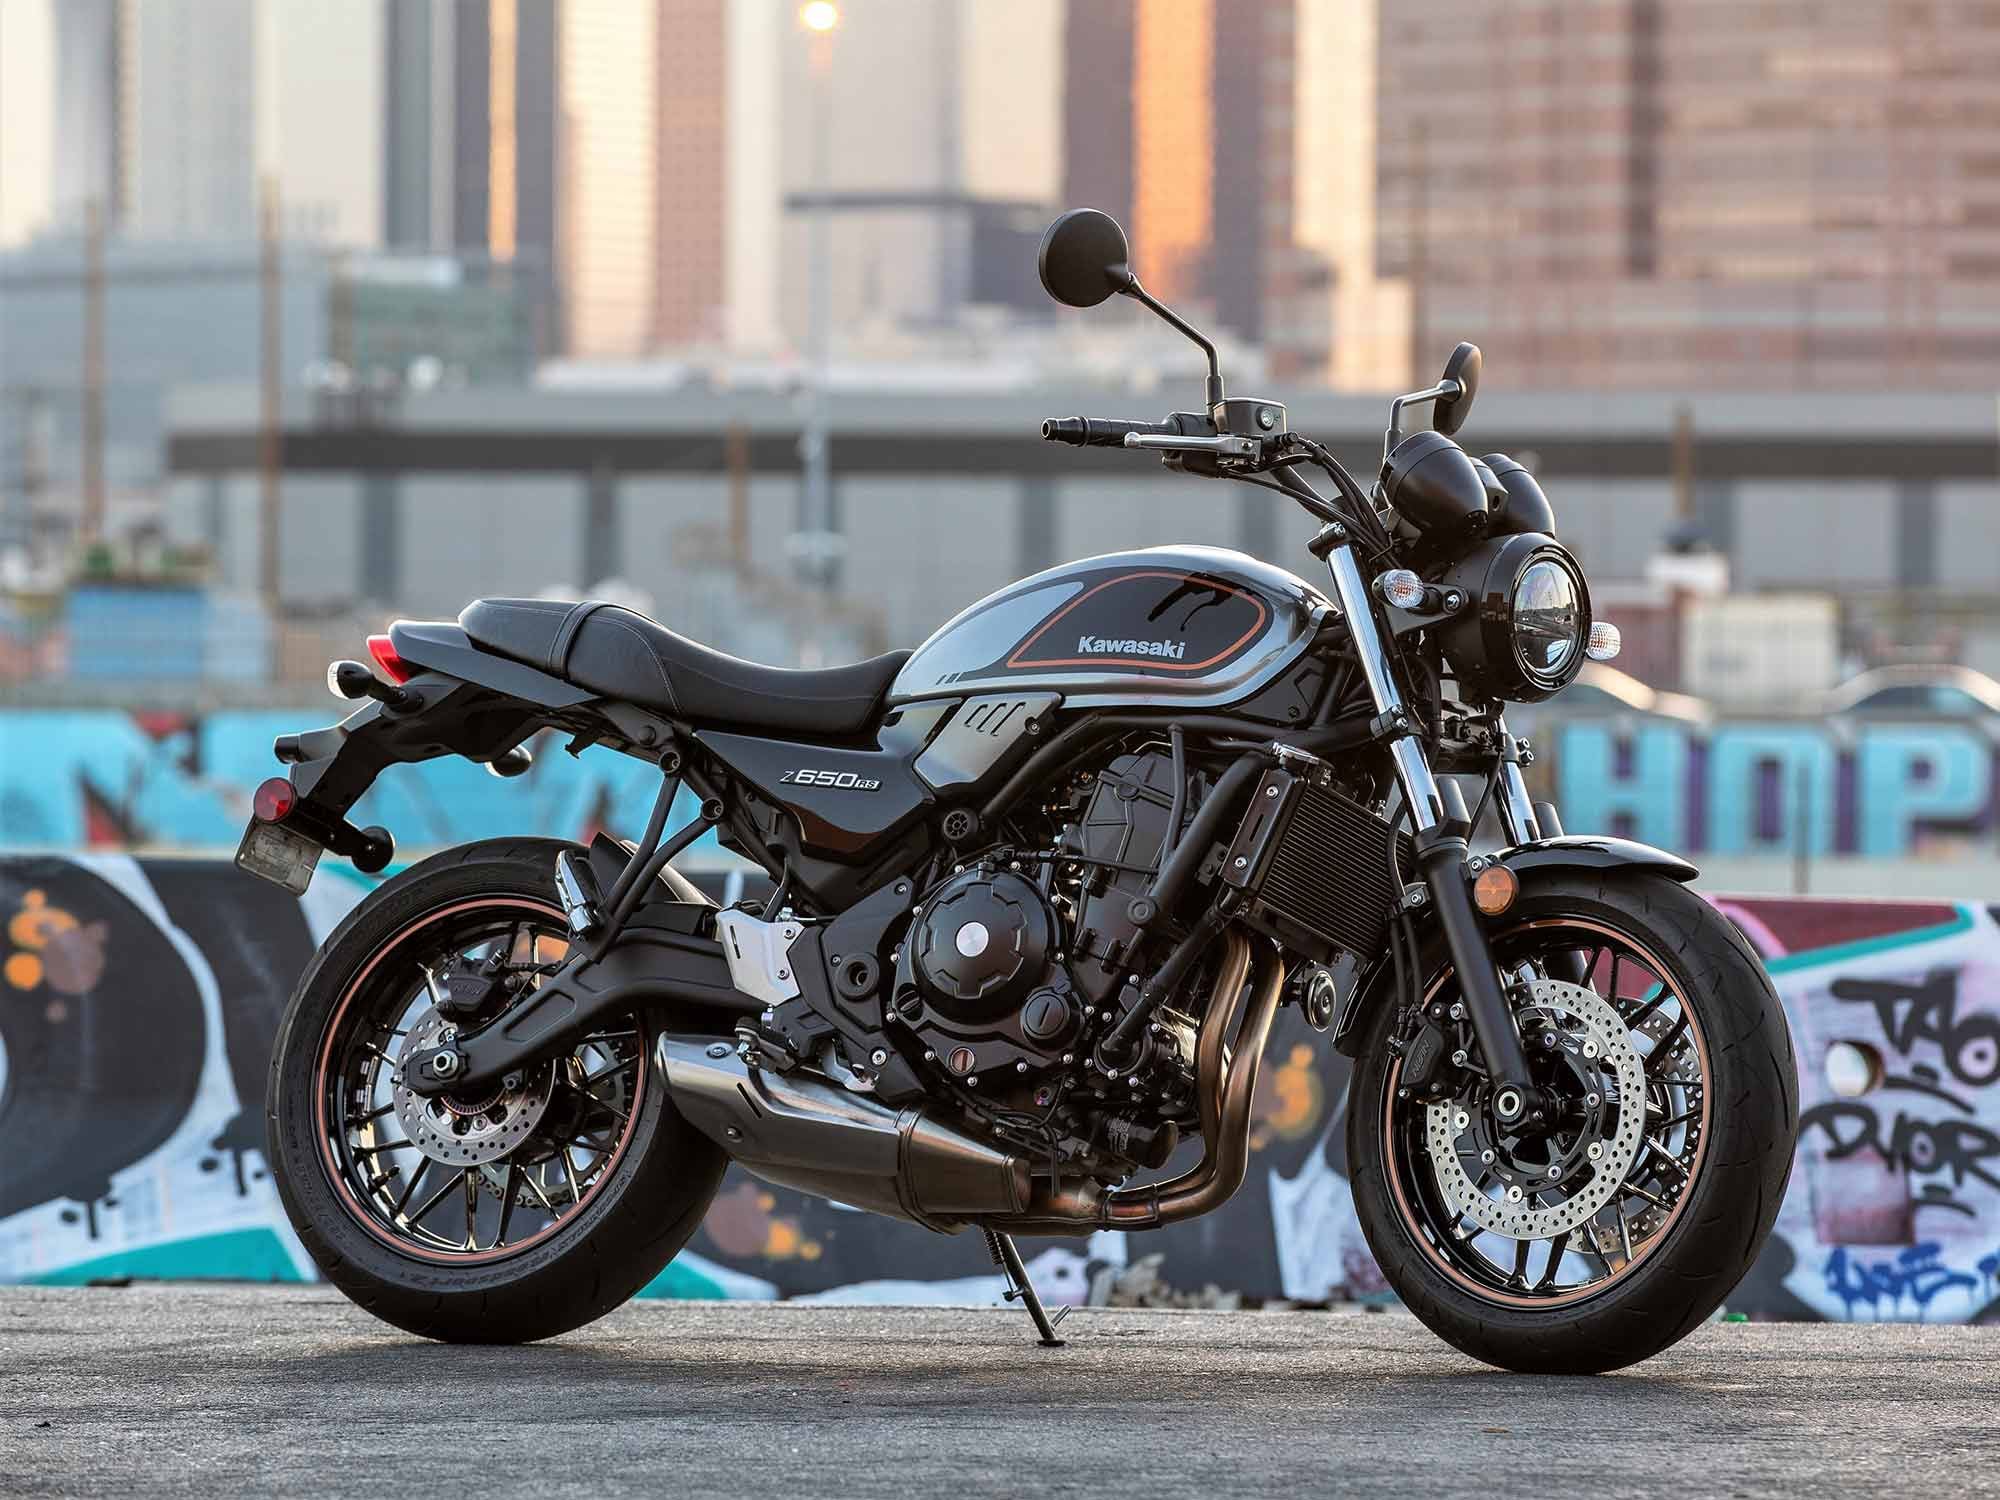 Like the other RS-styled bikes, overall visuals set the Z650RS apart from its “<i>sugomi</i>”-inspired Z650 brother. This is the Metallic Moondust Gray colorway.